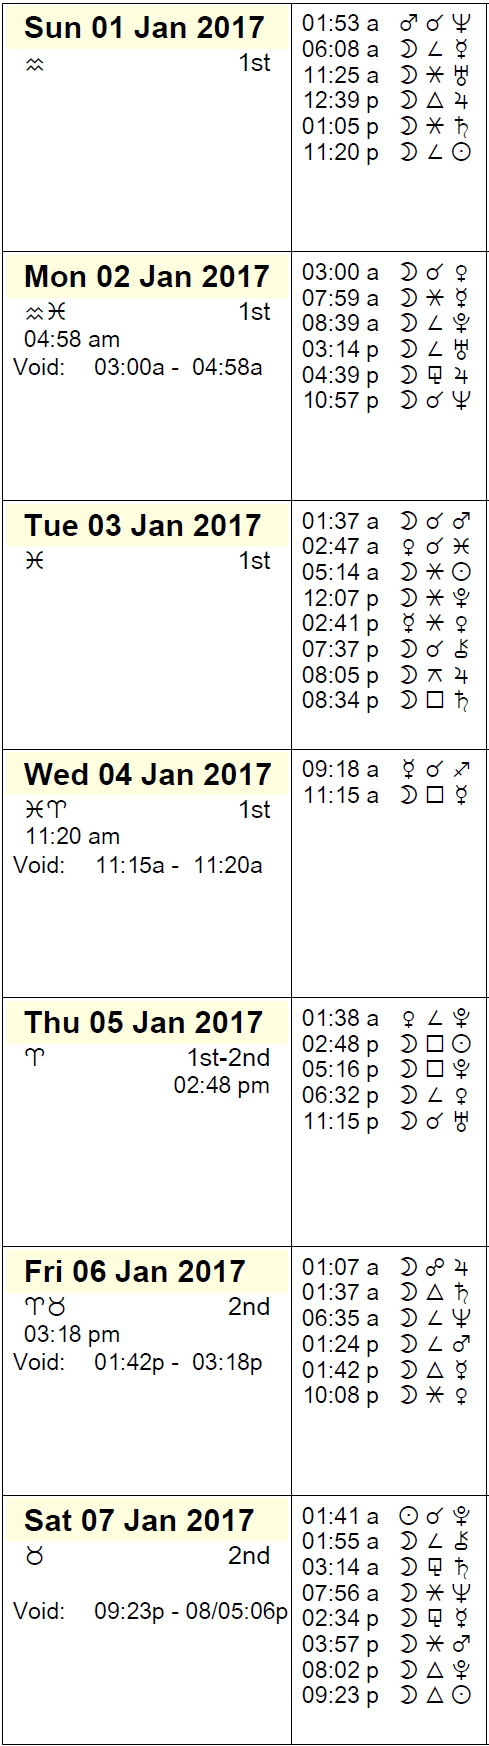 This Week in Astrology Calendar - January 1 to 7, 2017